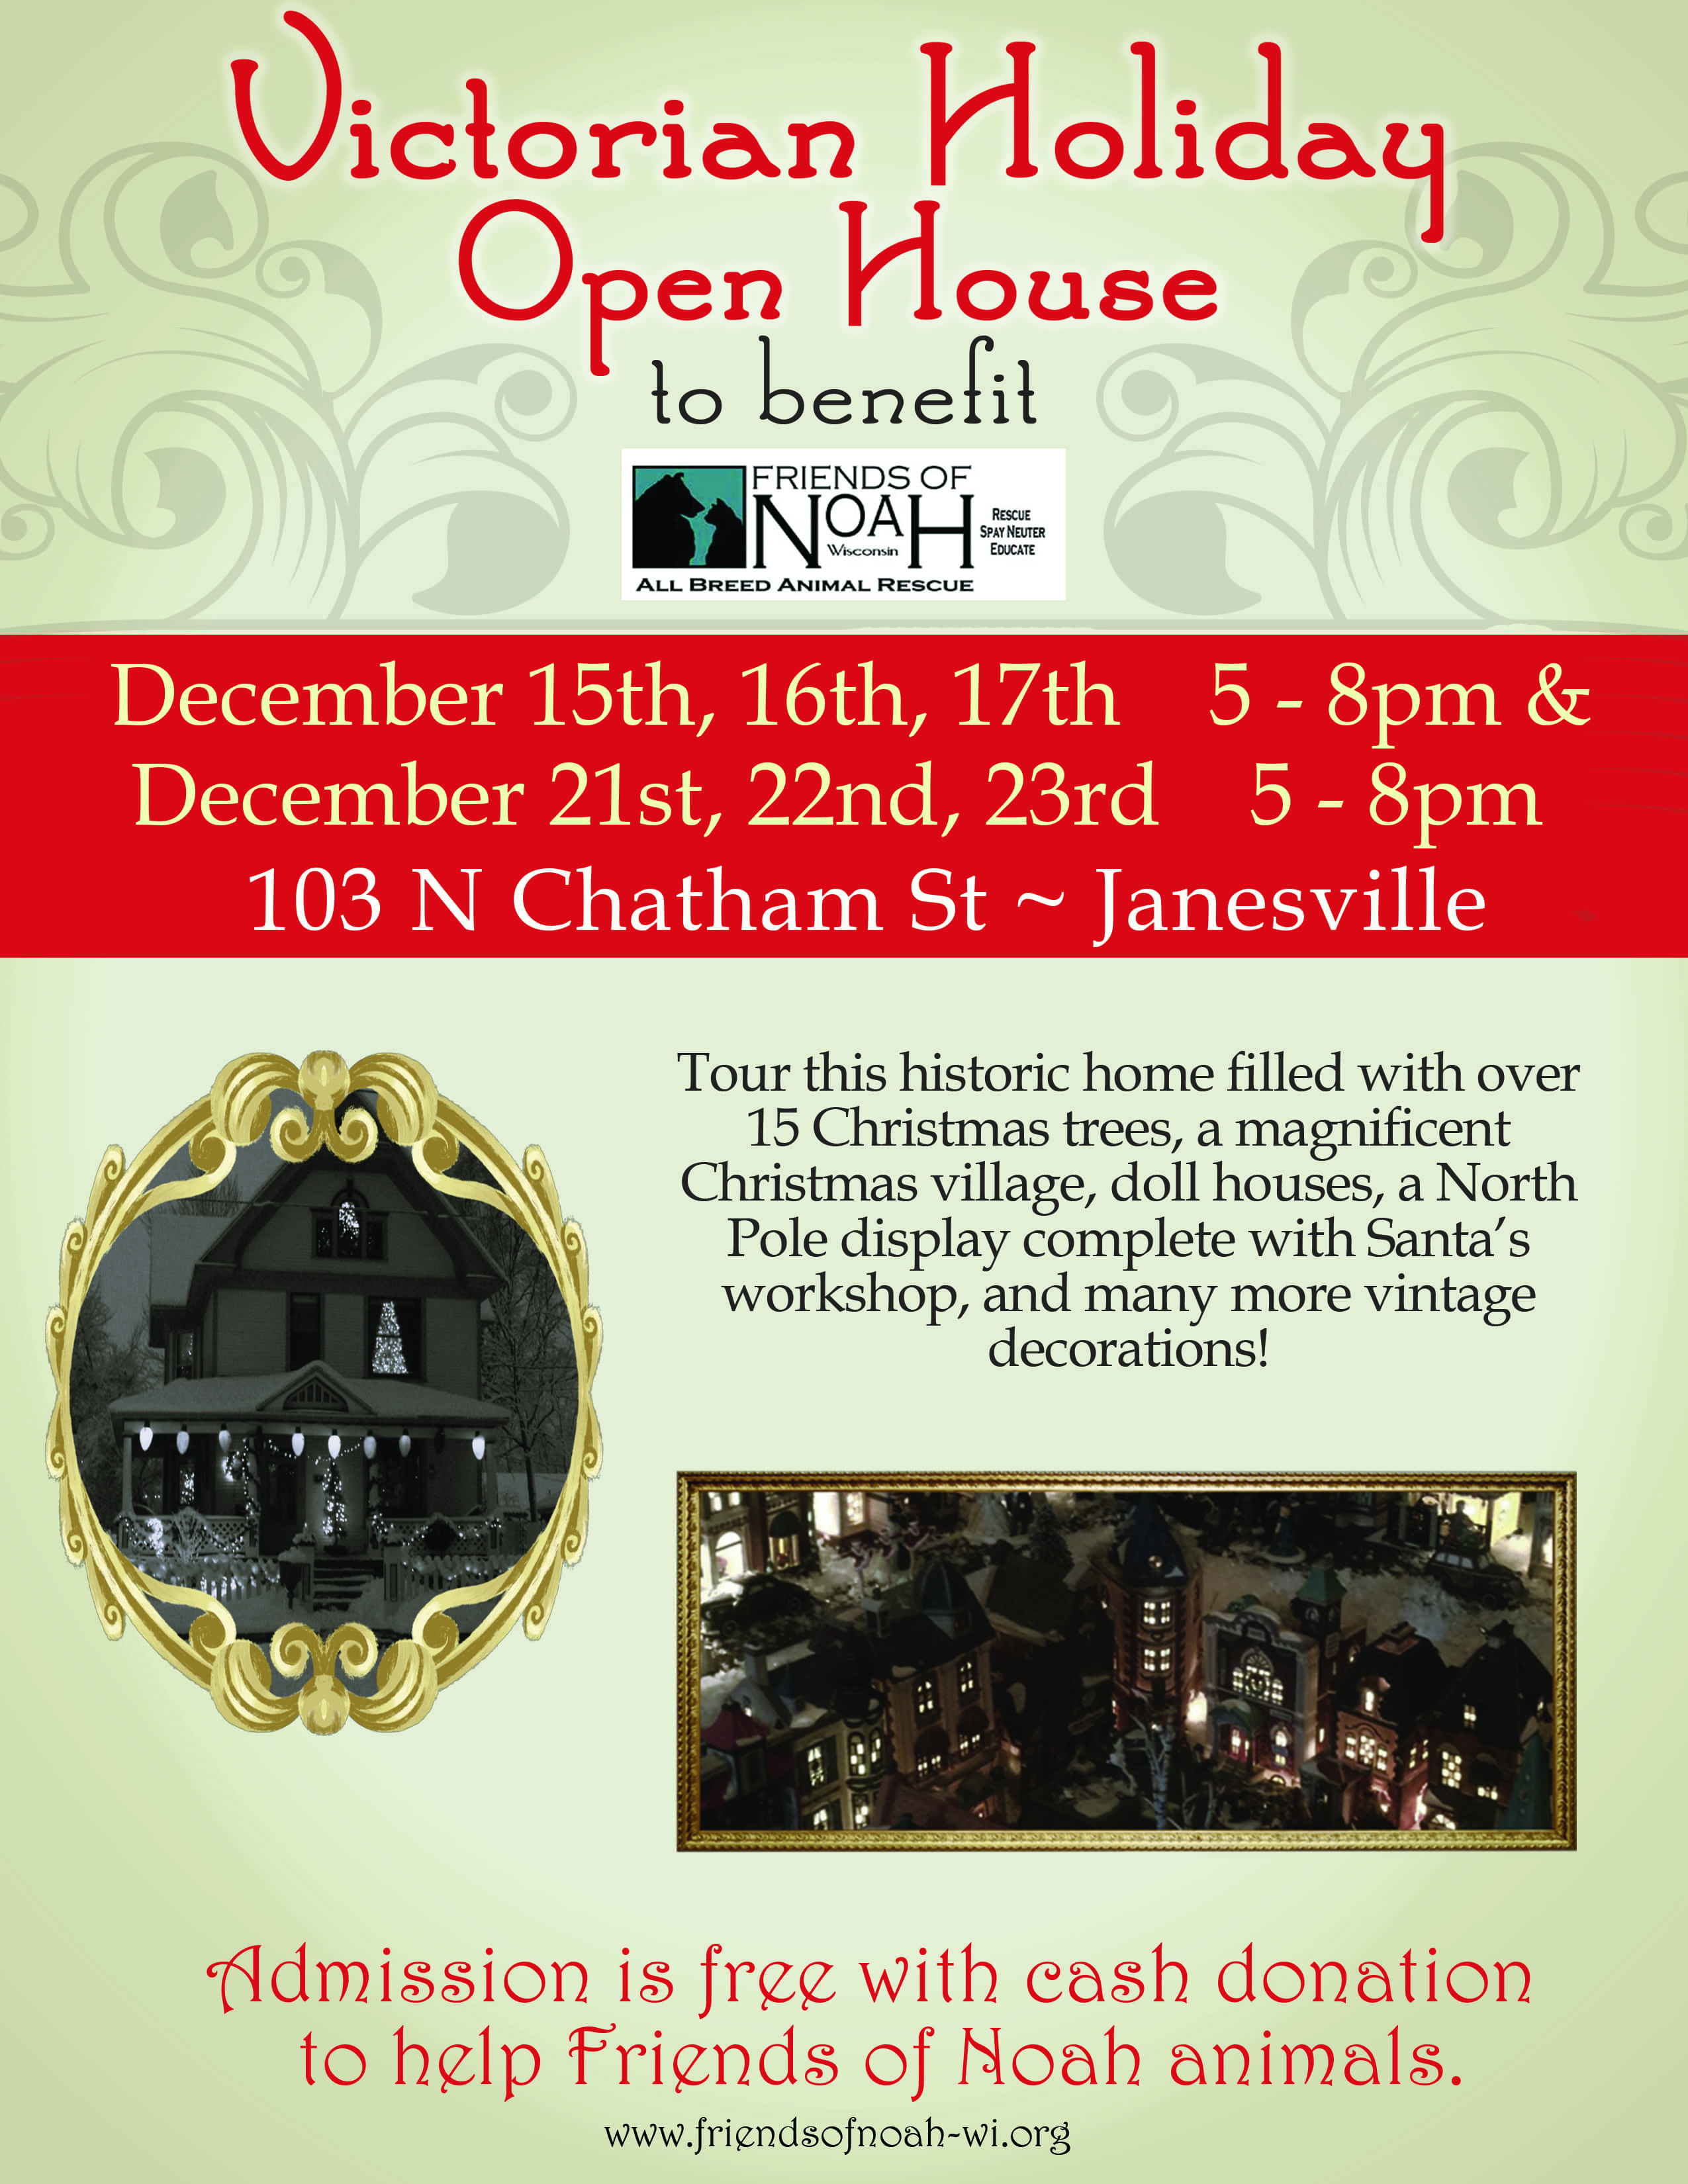 victorian-holiday-open-house-poster-copy1-2